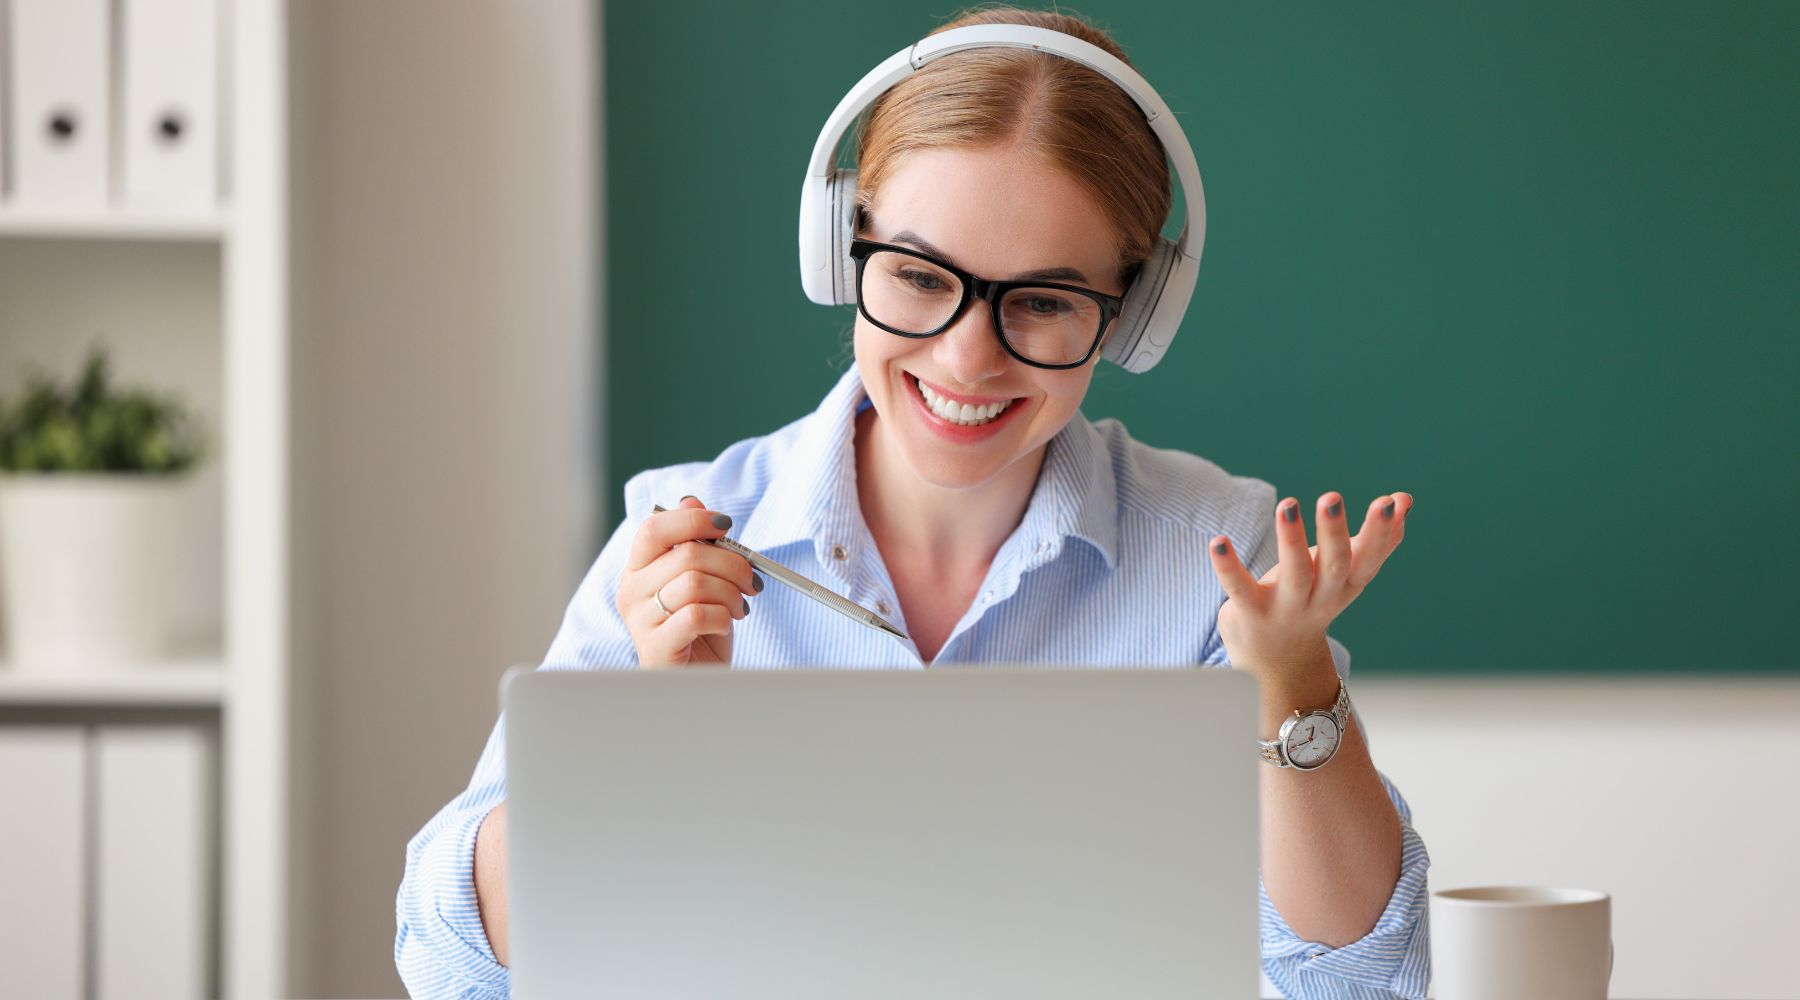 5 Key Features to Look for When Purchasing Headphones for the Classroom